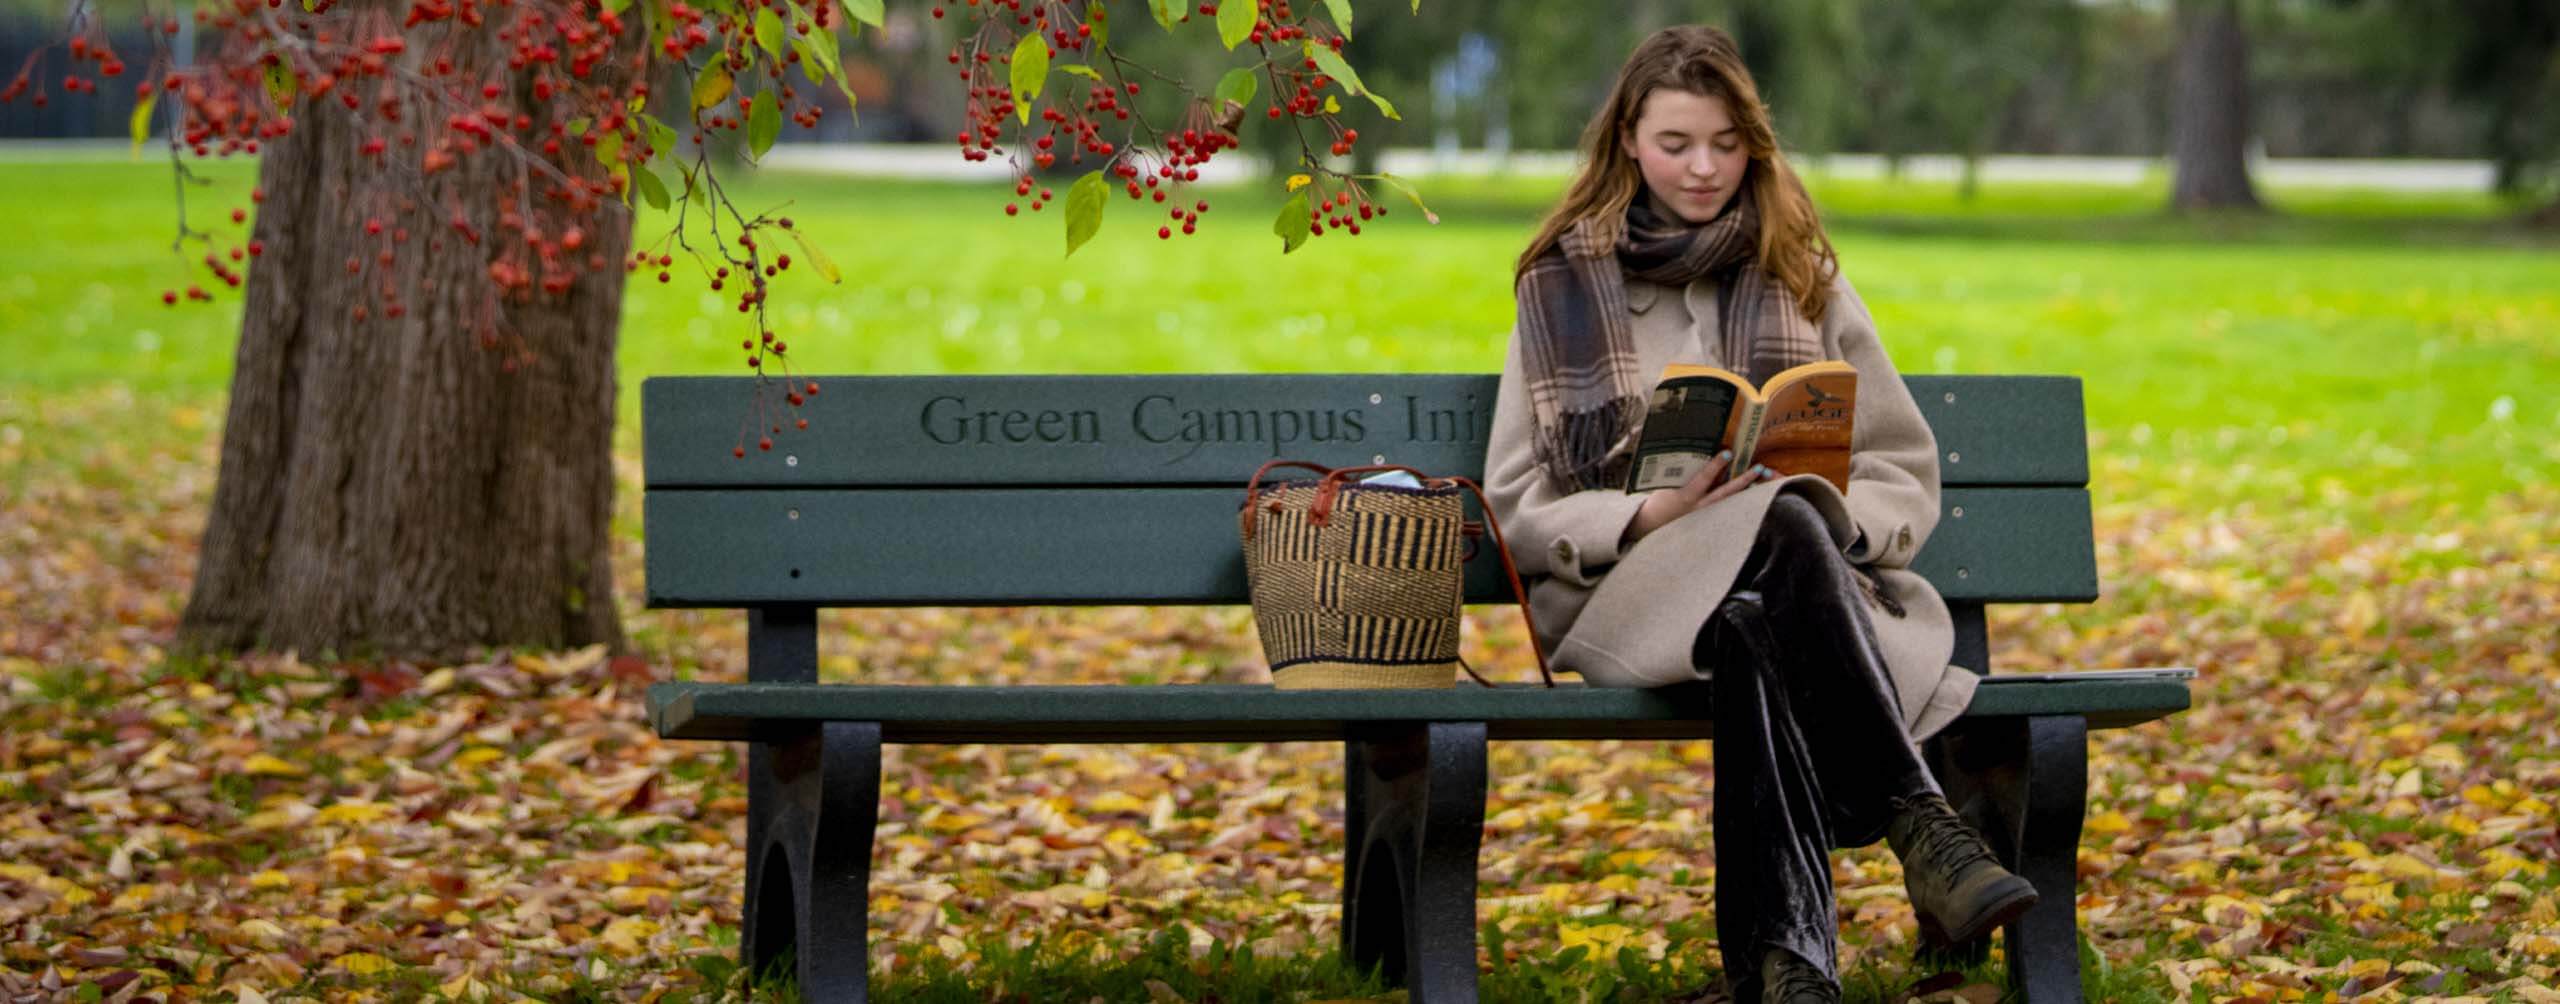 A photo of someone reading on a bench in fall